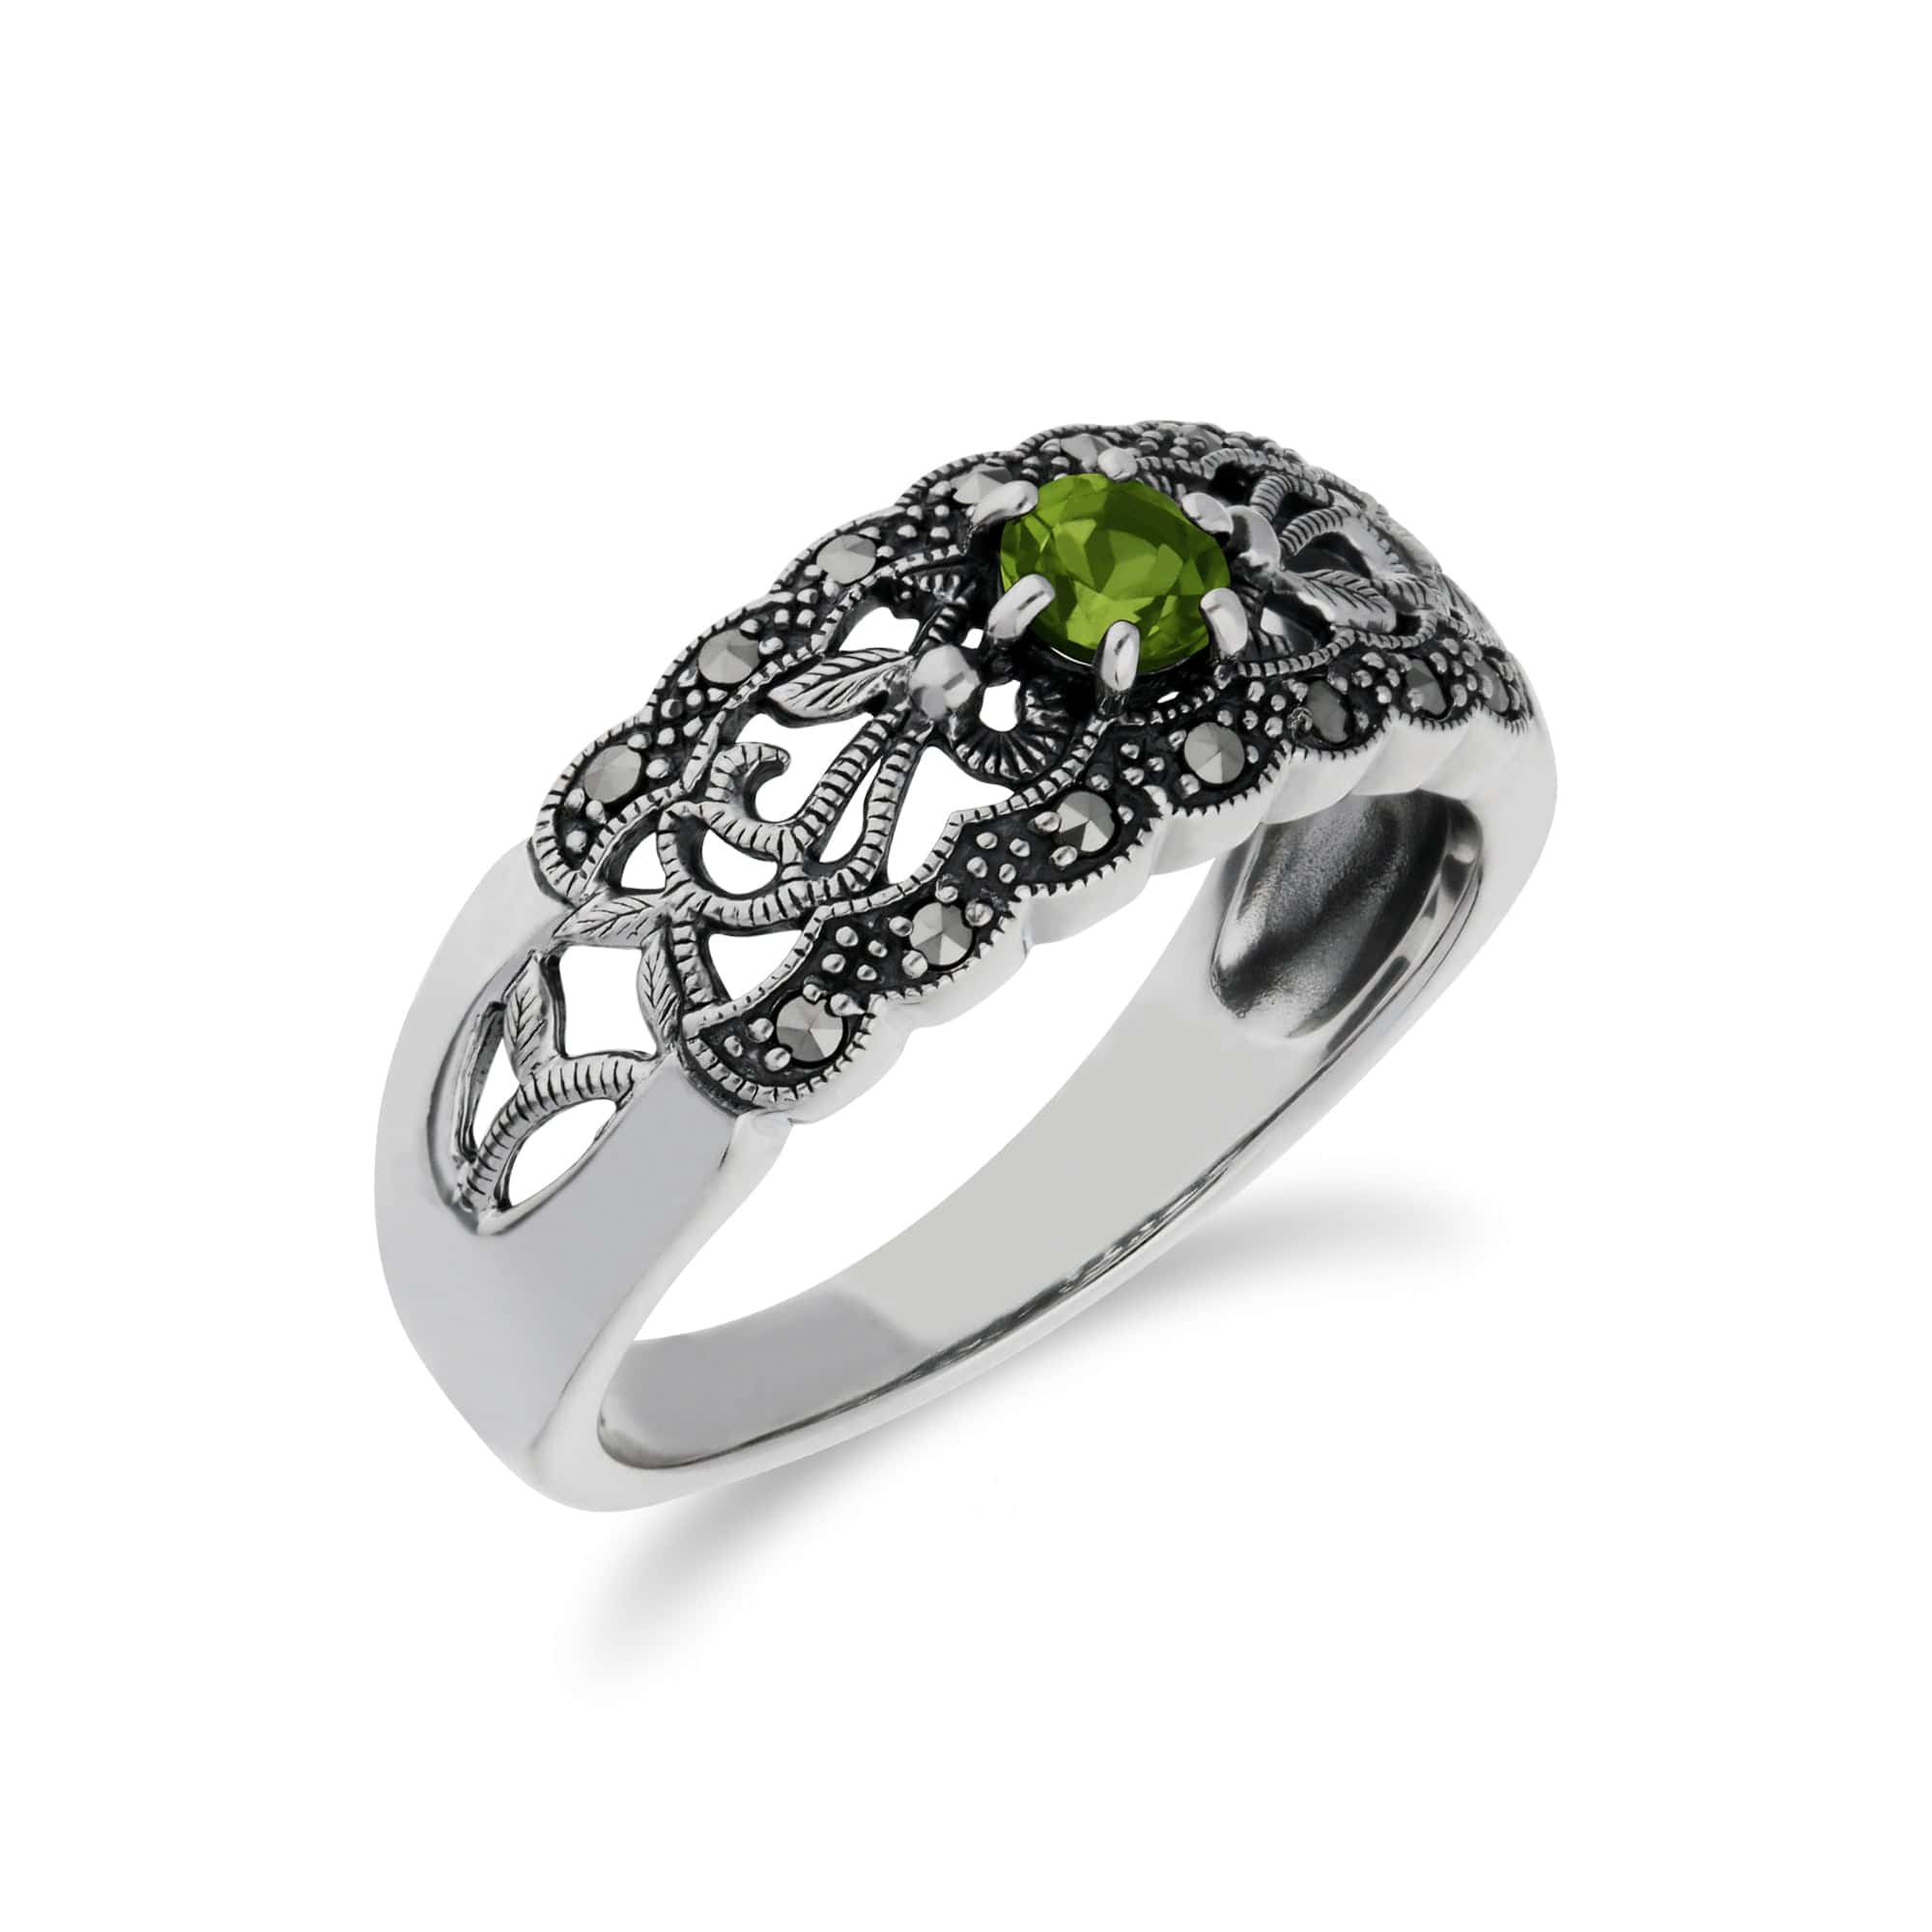 214R597703925 Art Nouveau Style Round Peridot & Marcasite Floral Band Ring in 925 Sterling Silver 2